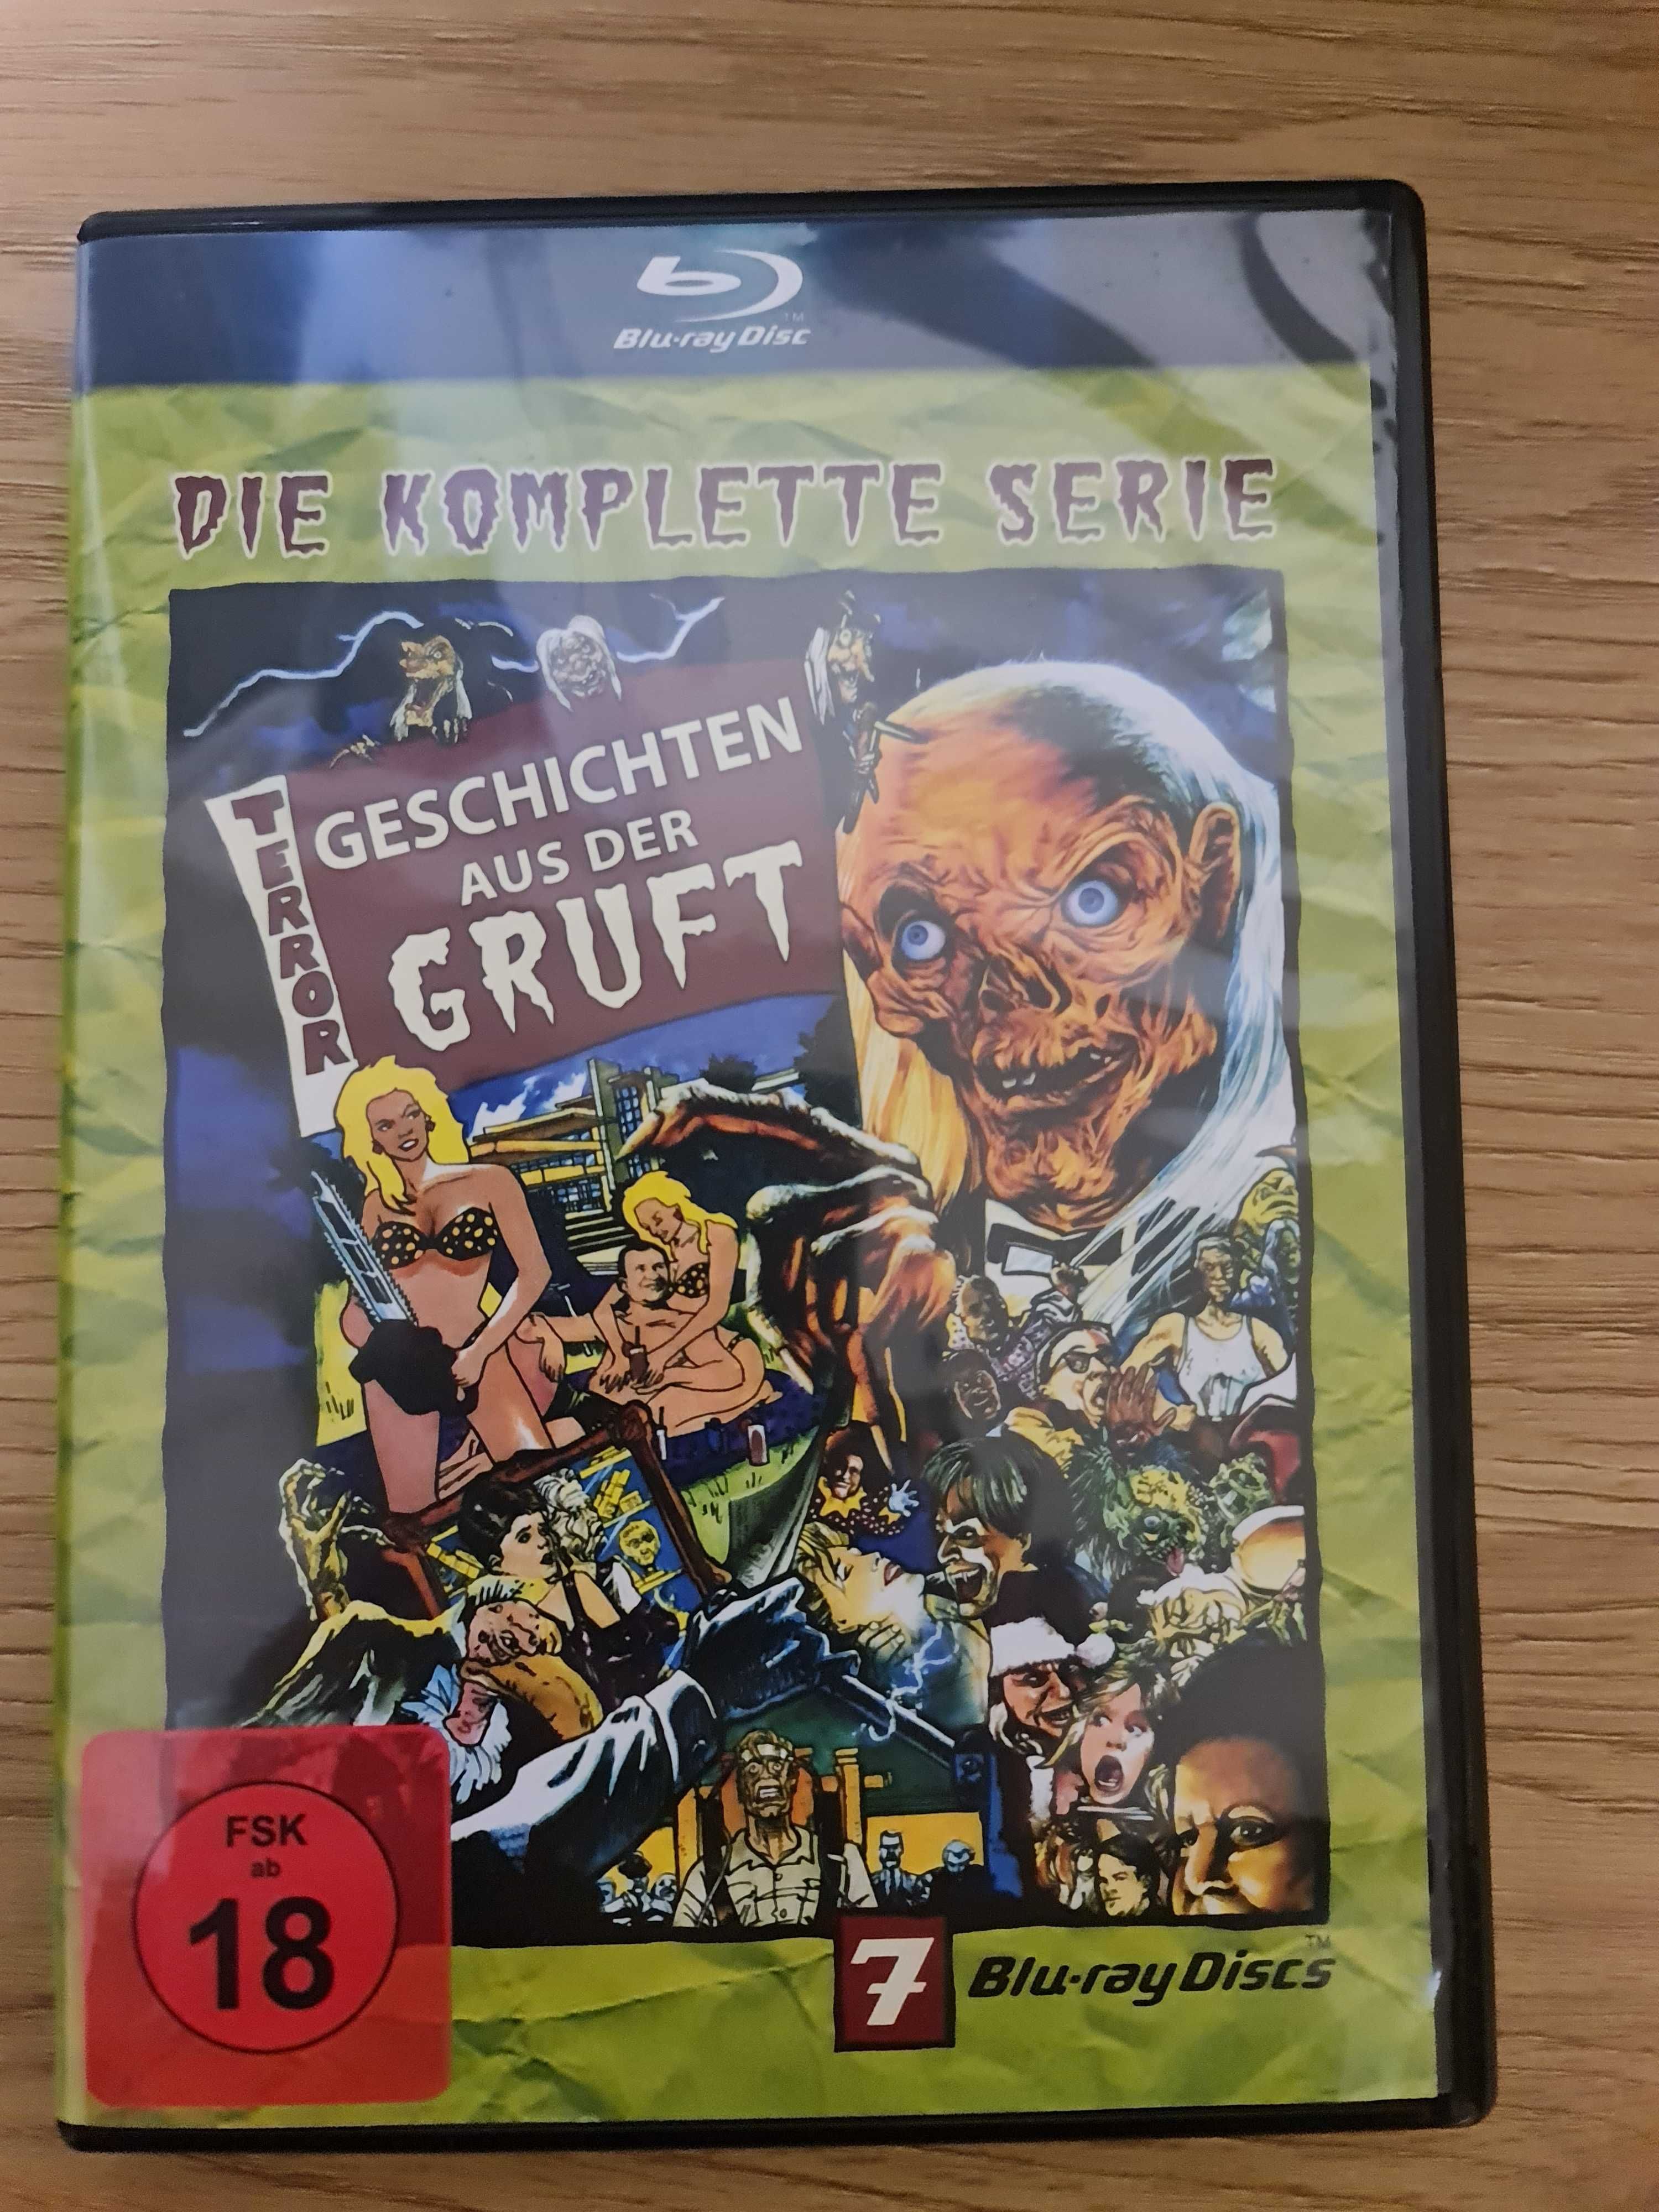 Tales from the Crypt, blu-ray